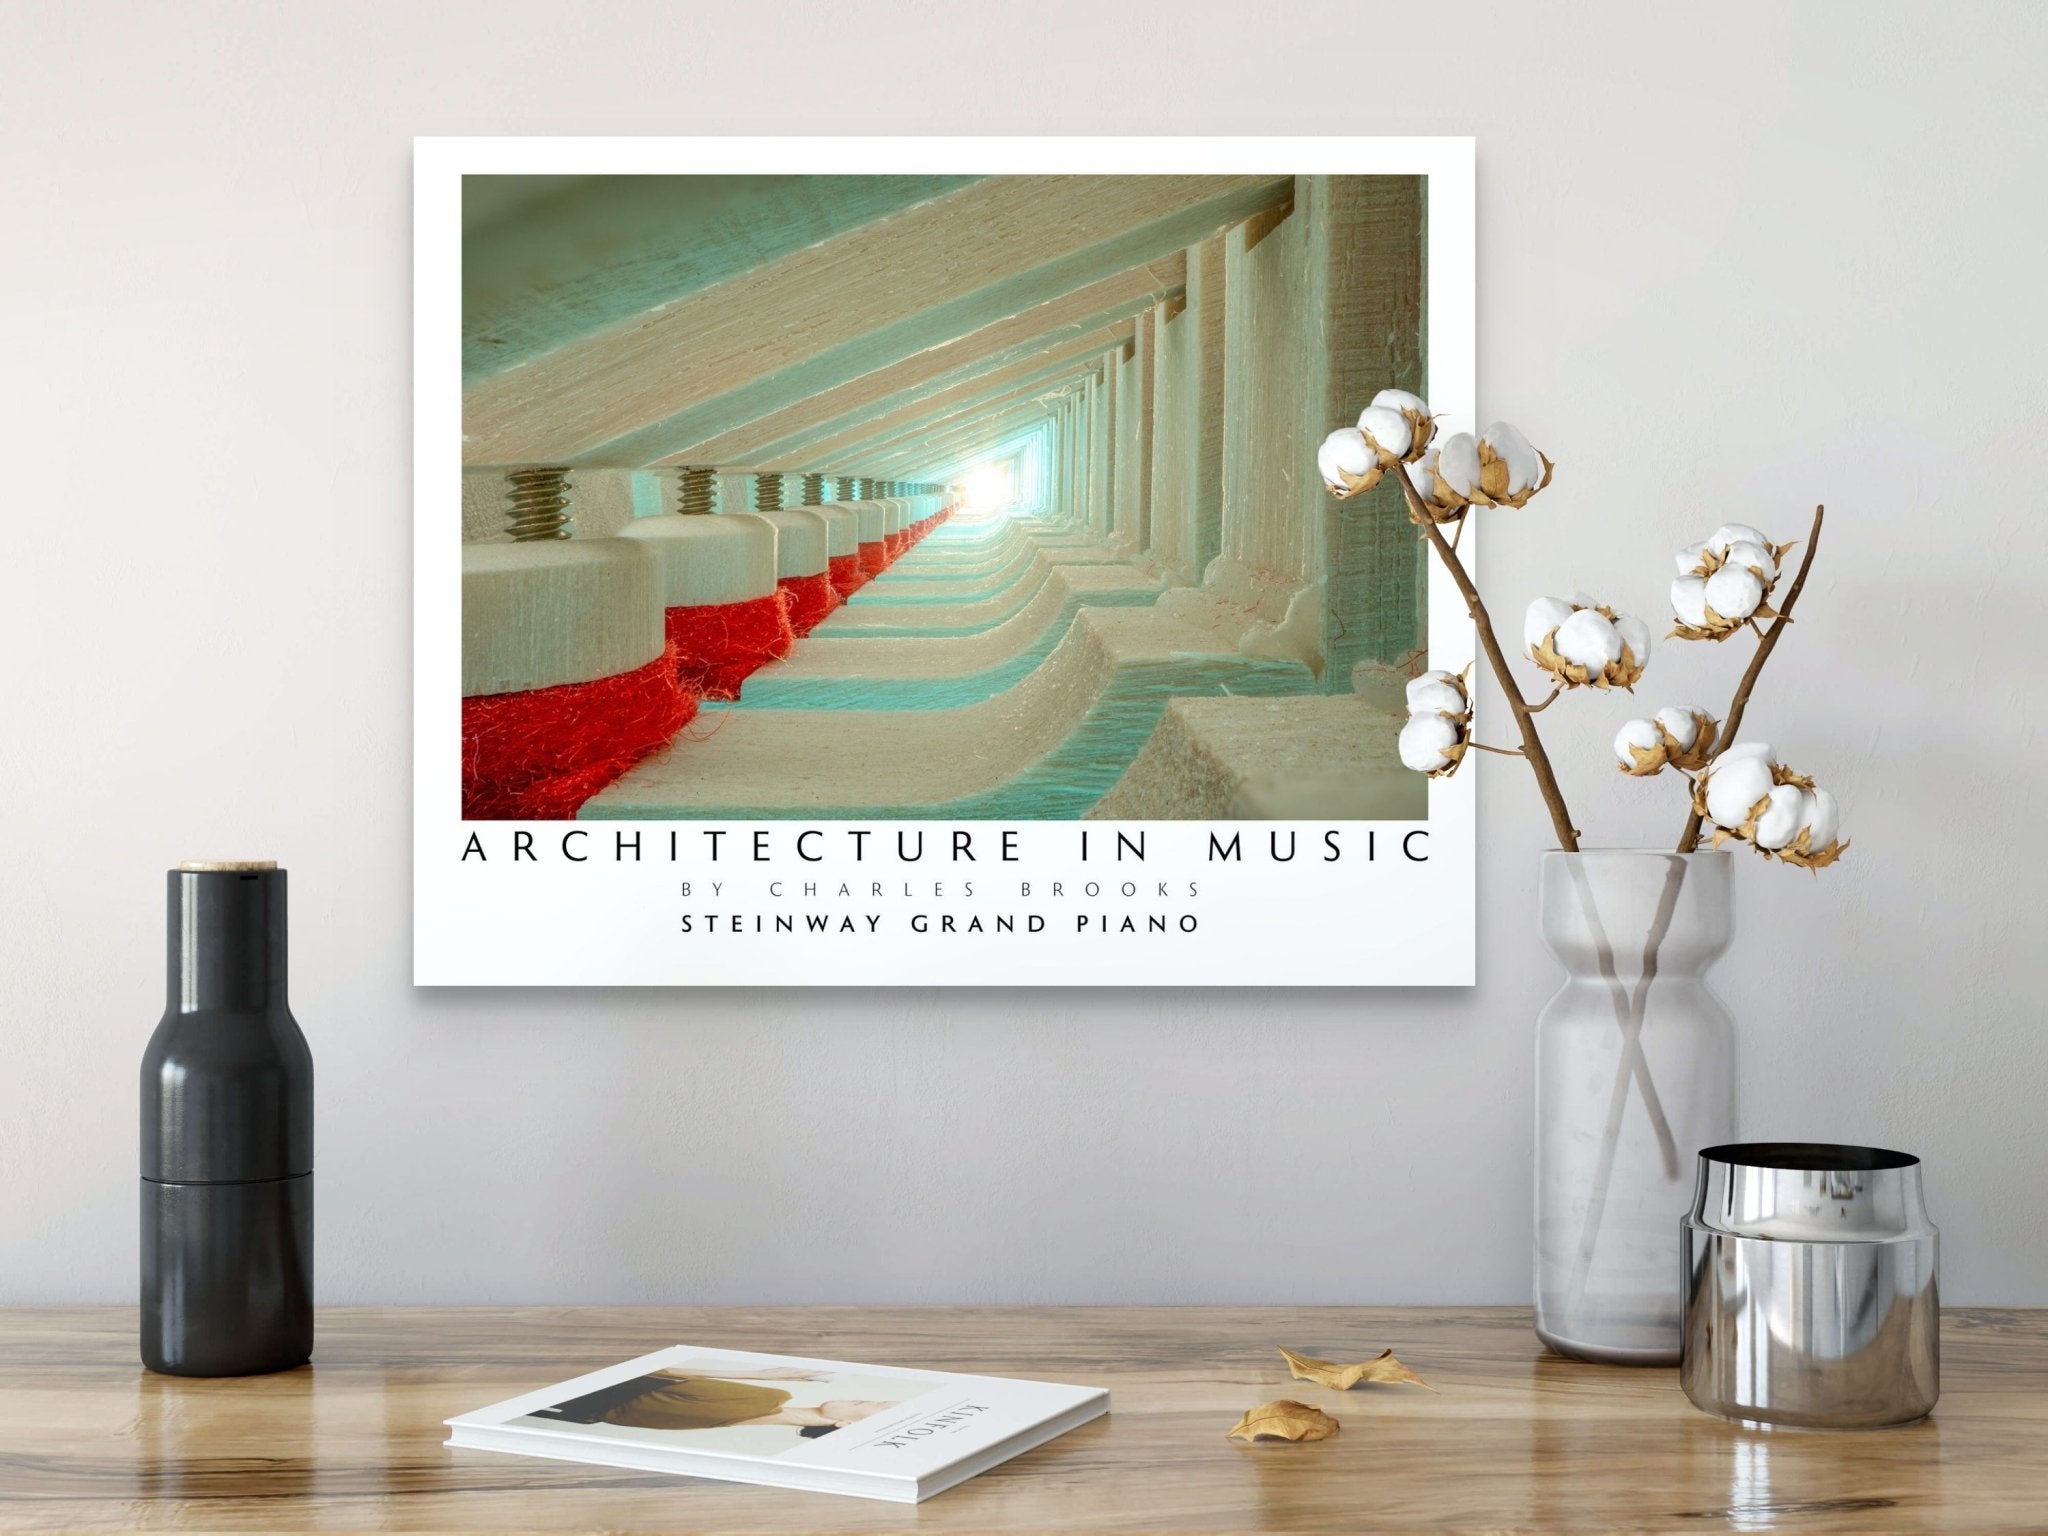 Photo of The Exquisite Architecture of Steinway, Part 2. High Quality Poster. - Giclée Poster Print - Architecture In Music